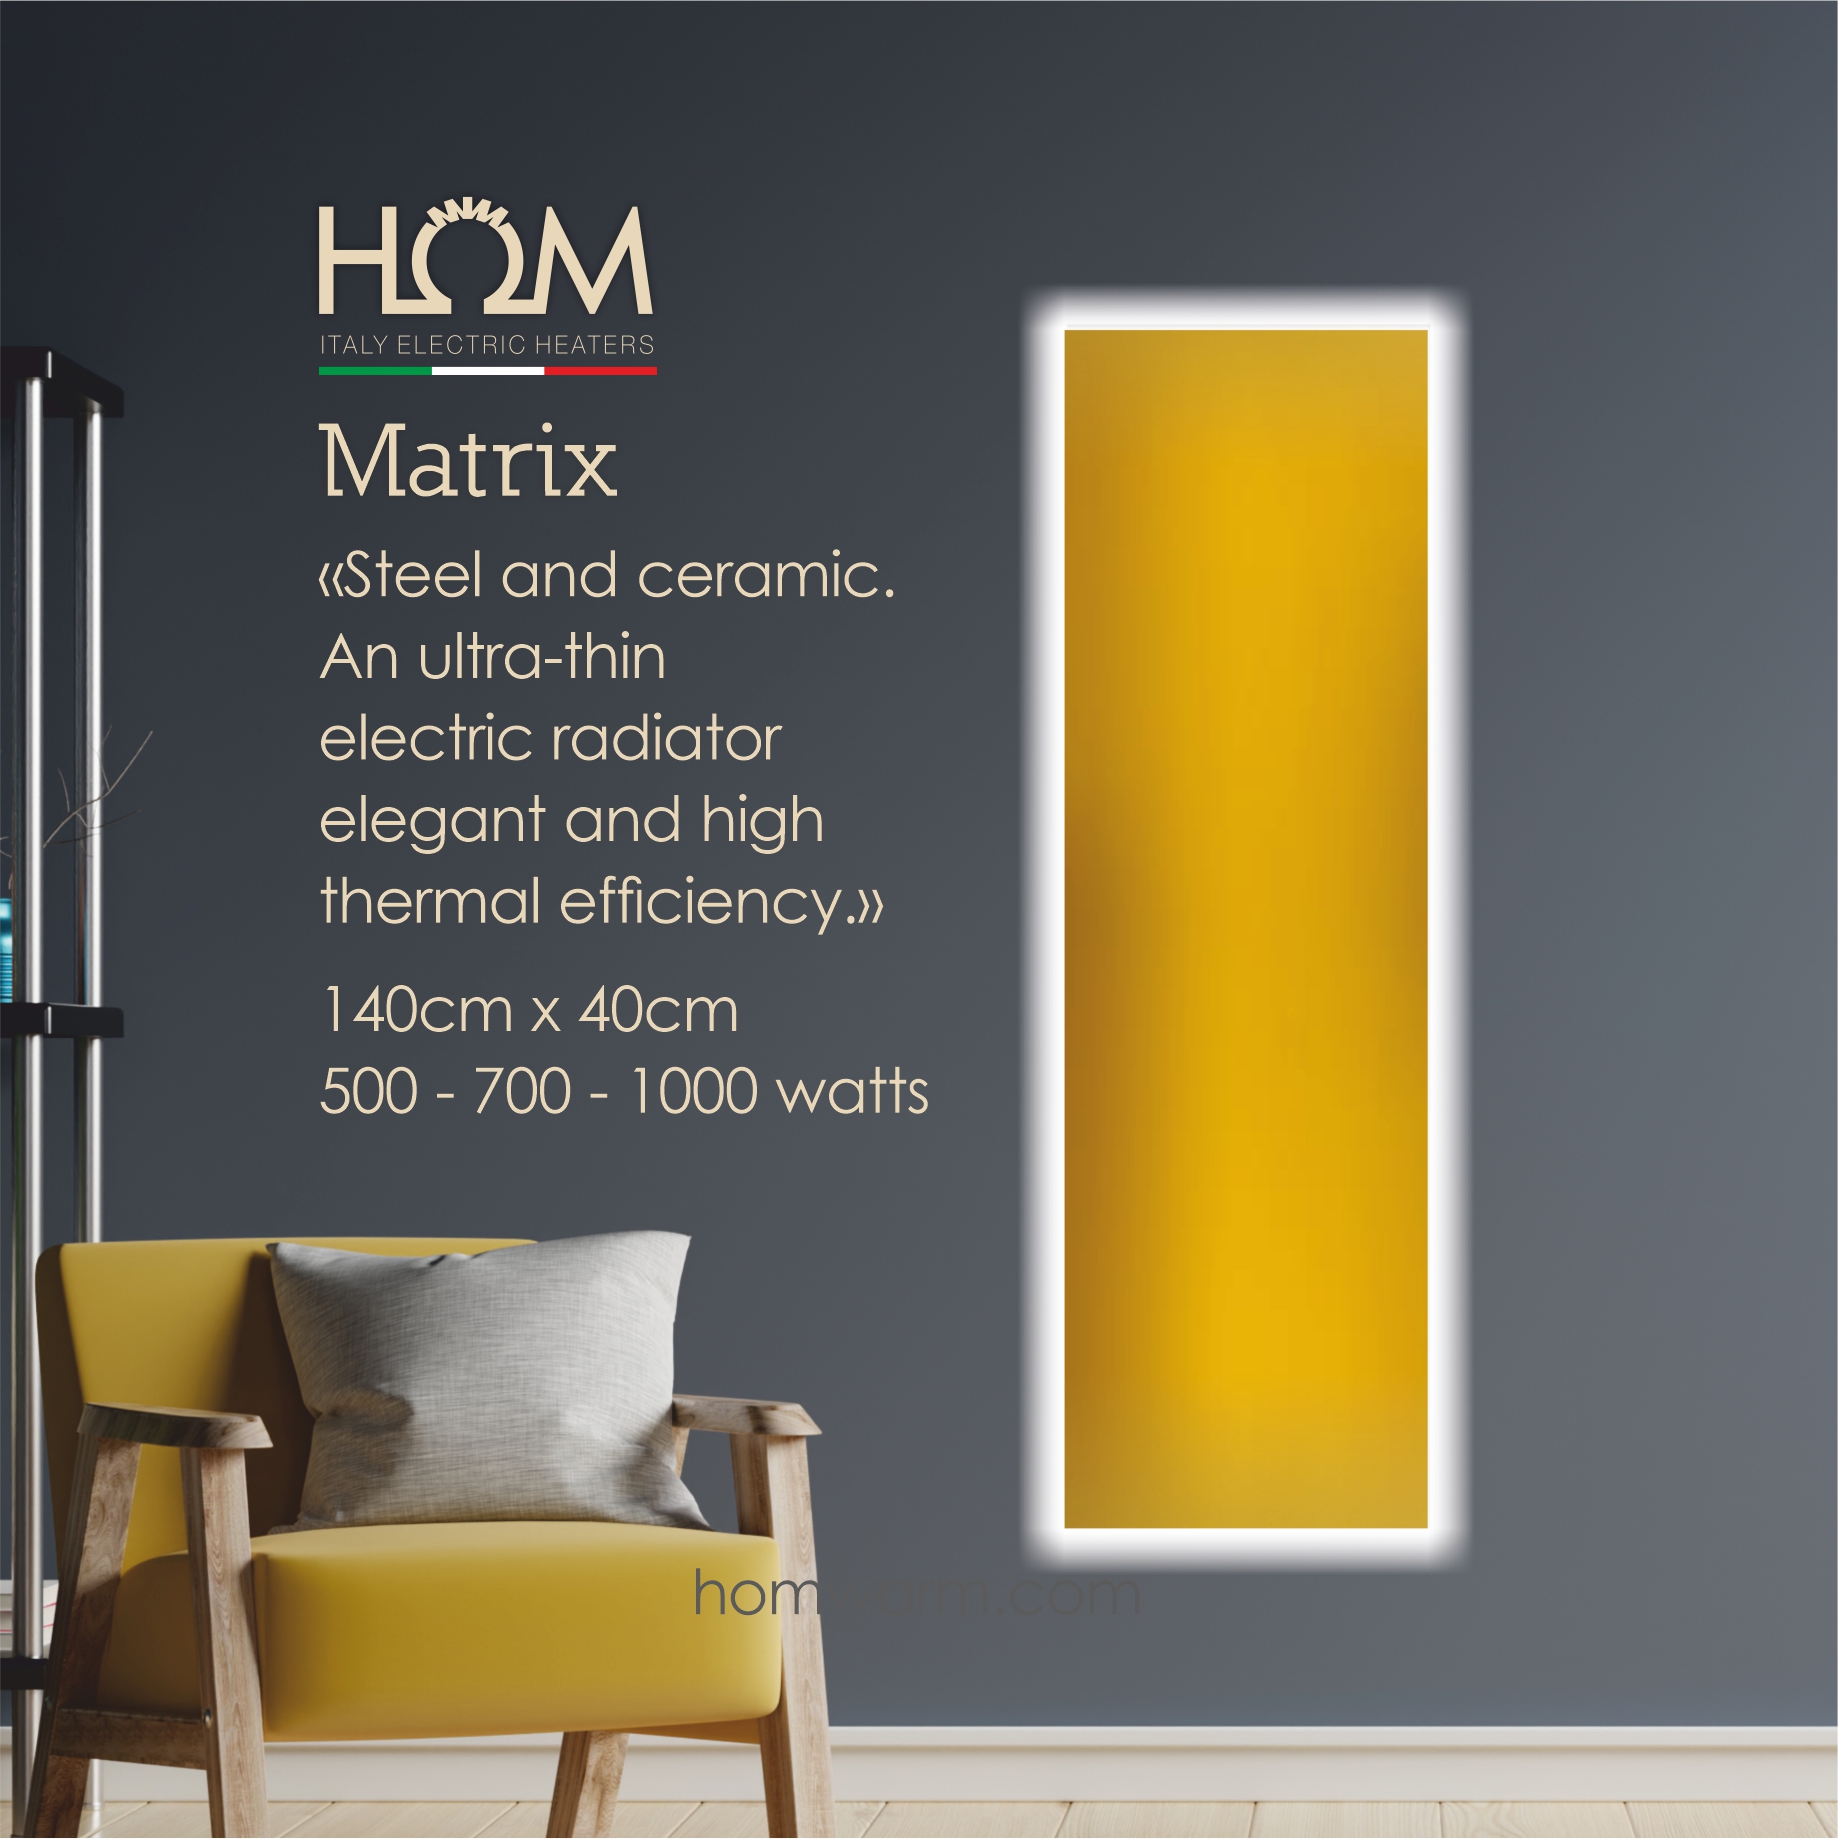 New HOM radiator - Ultra-thin and with high thermal efficiency. With led back lighting